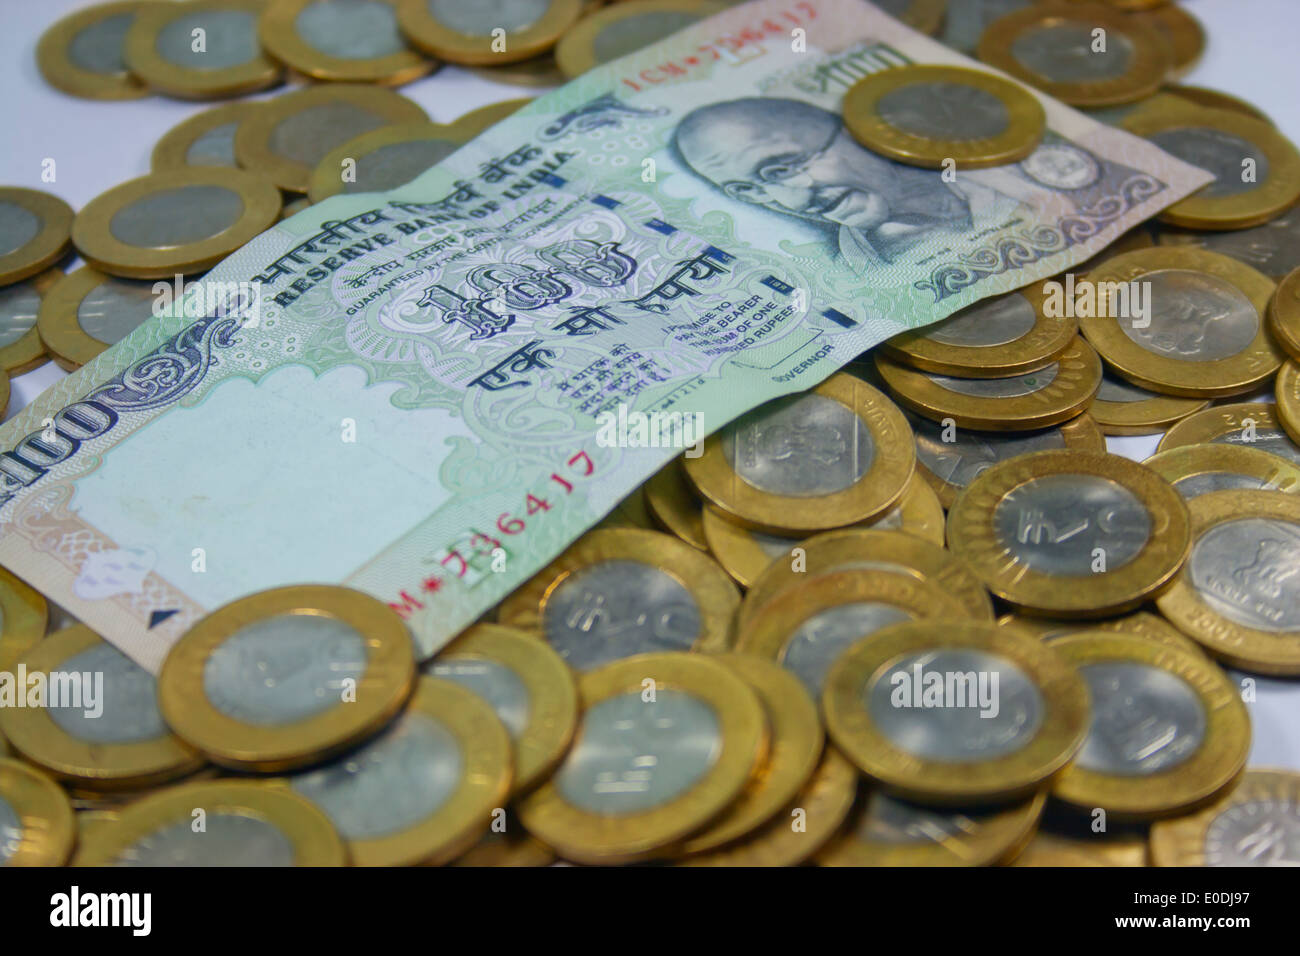 Indian currency notes with stack of coins Stock Photo